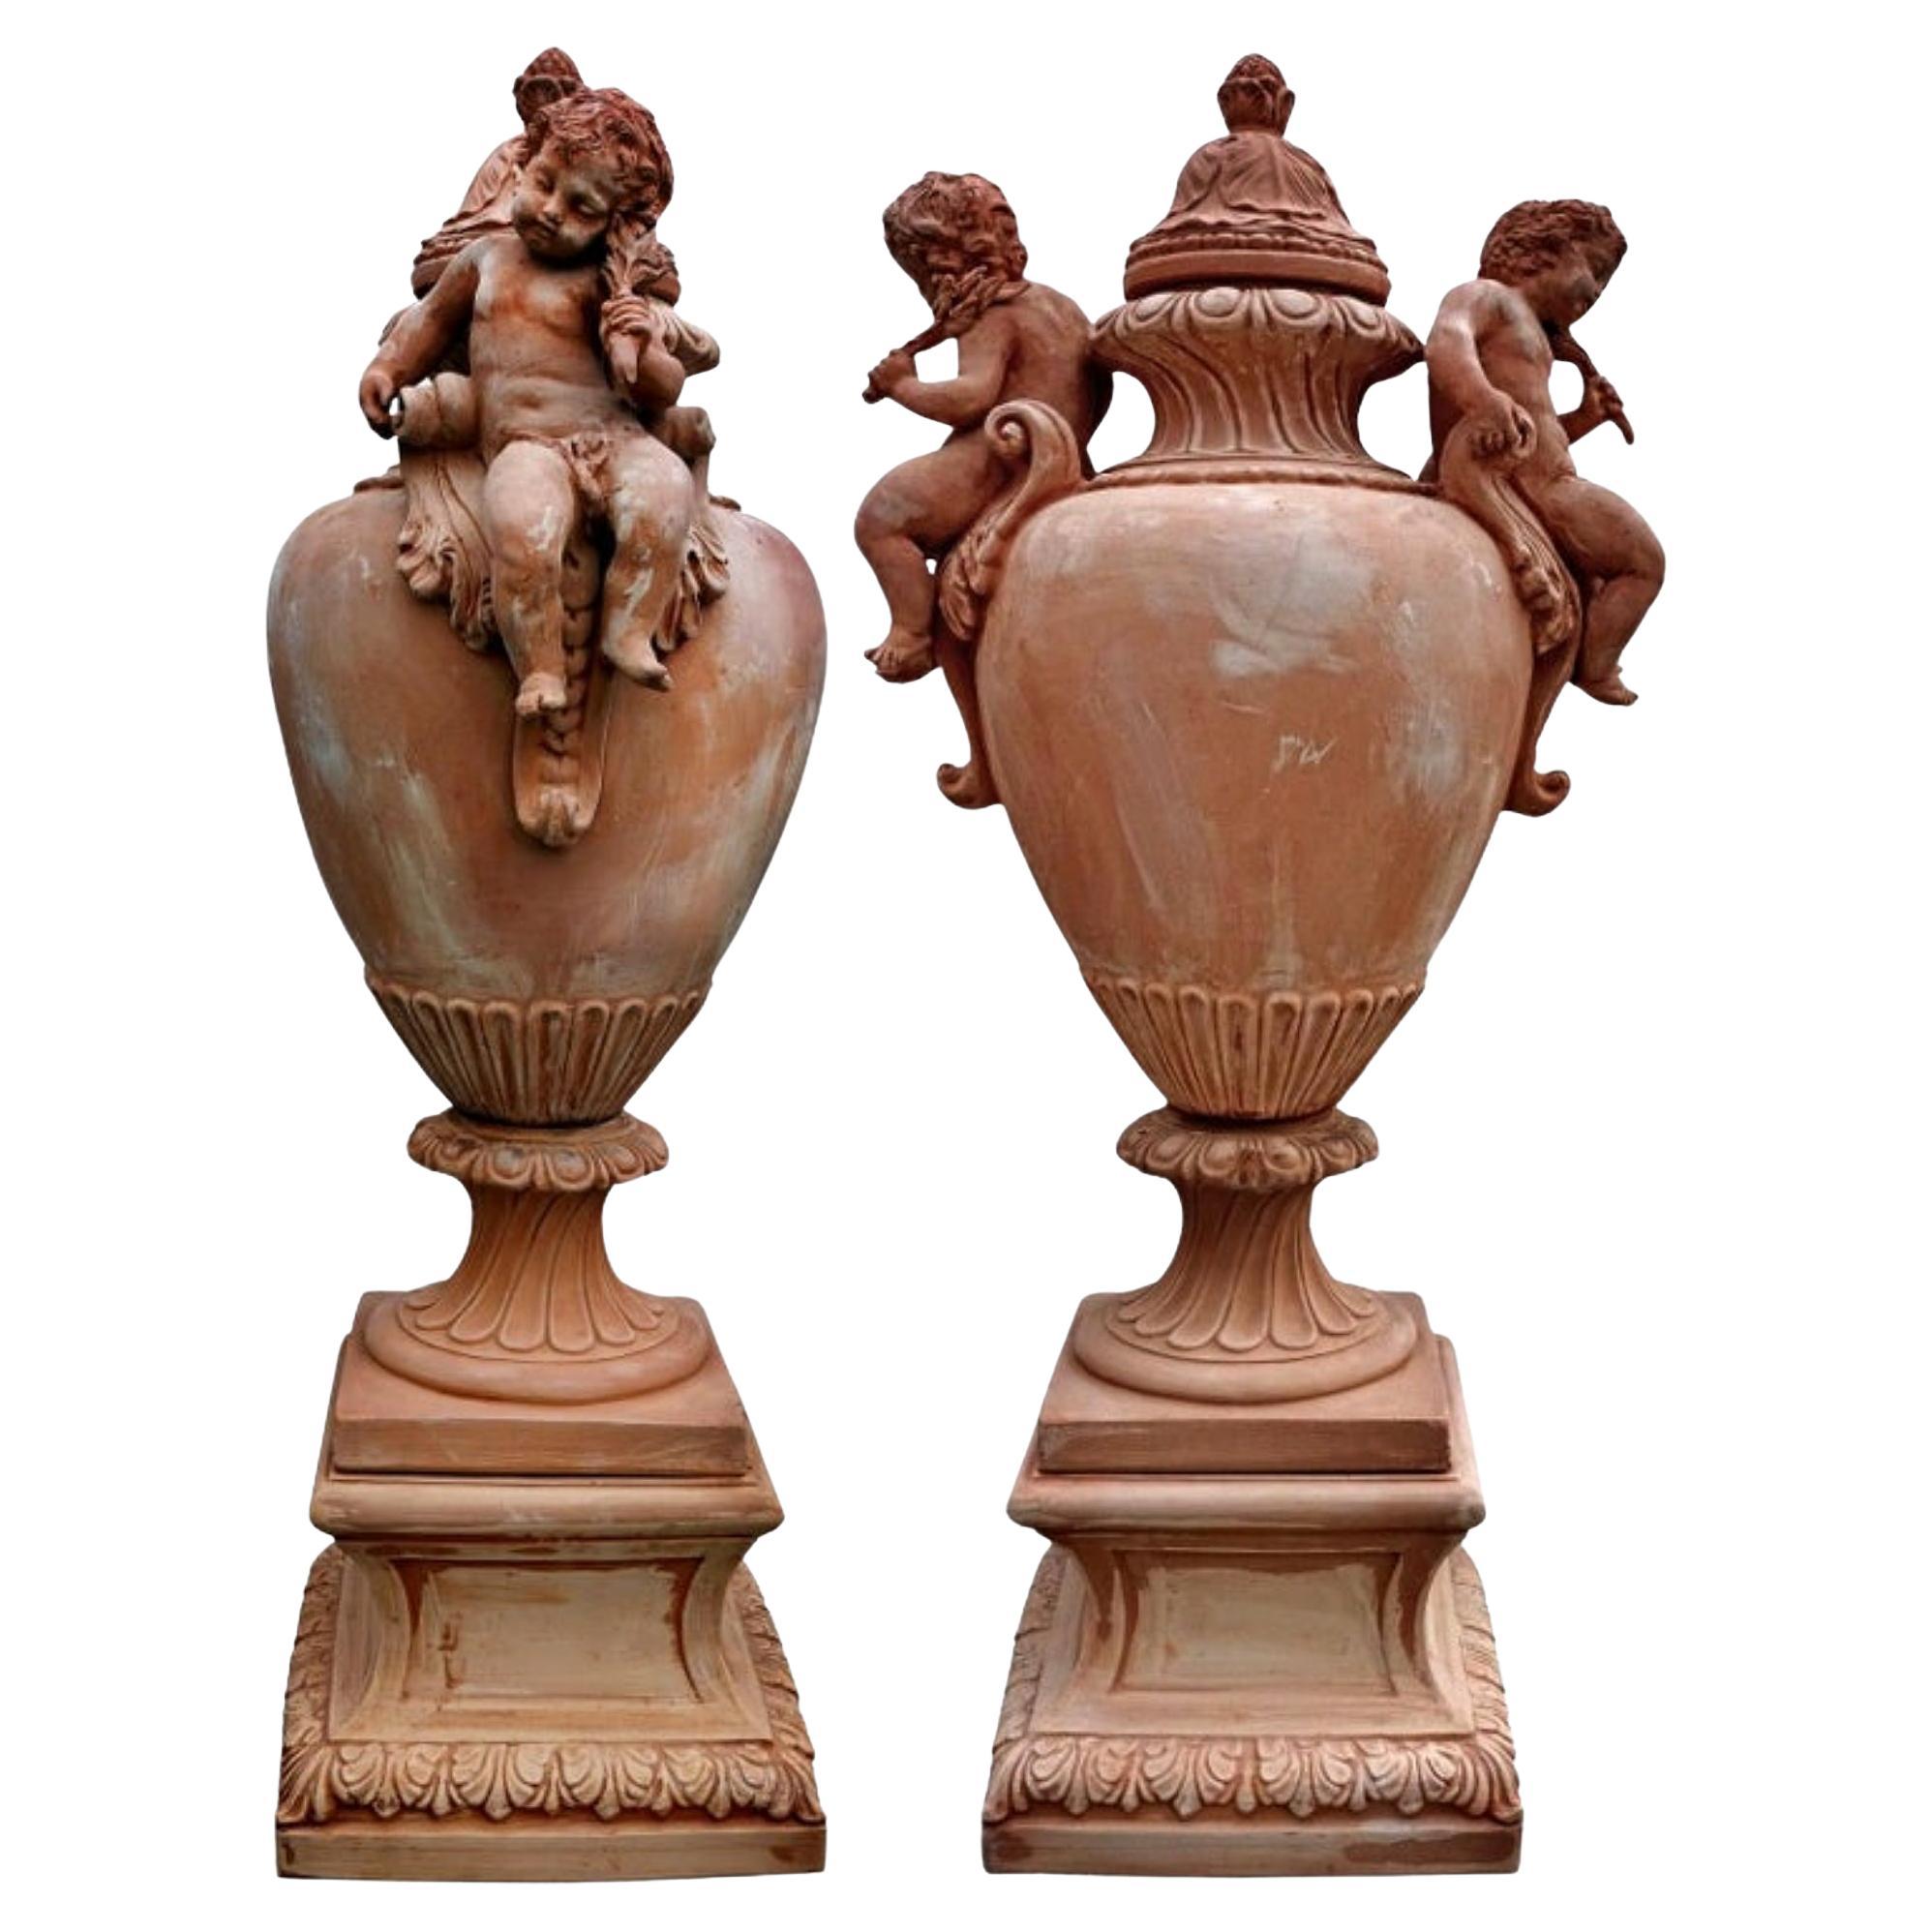 Huge Pair Baroque Vases with Putti, Terracotta, Late 19th / 20th Century For Sale